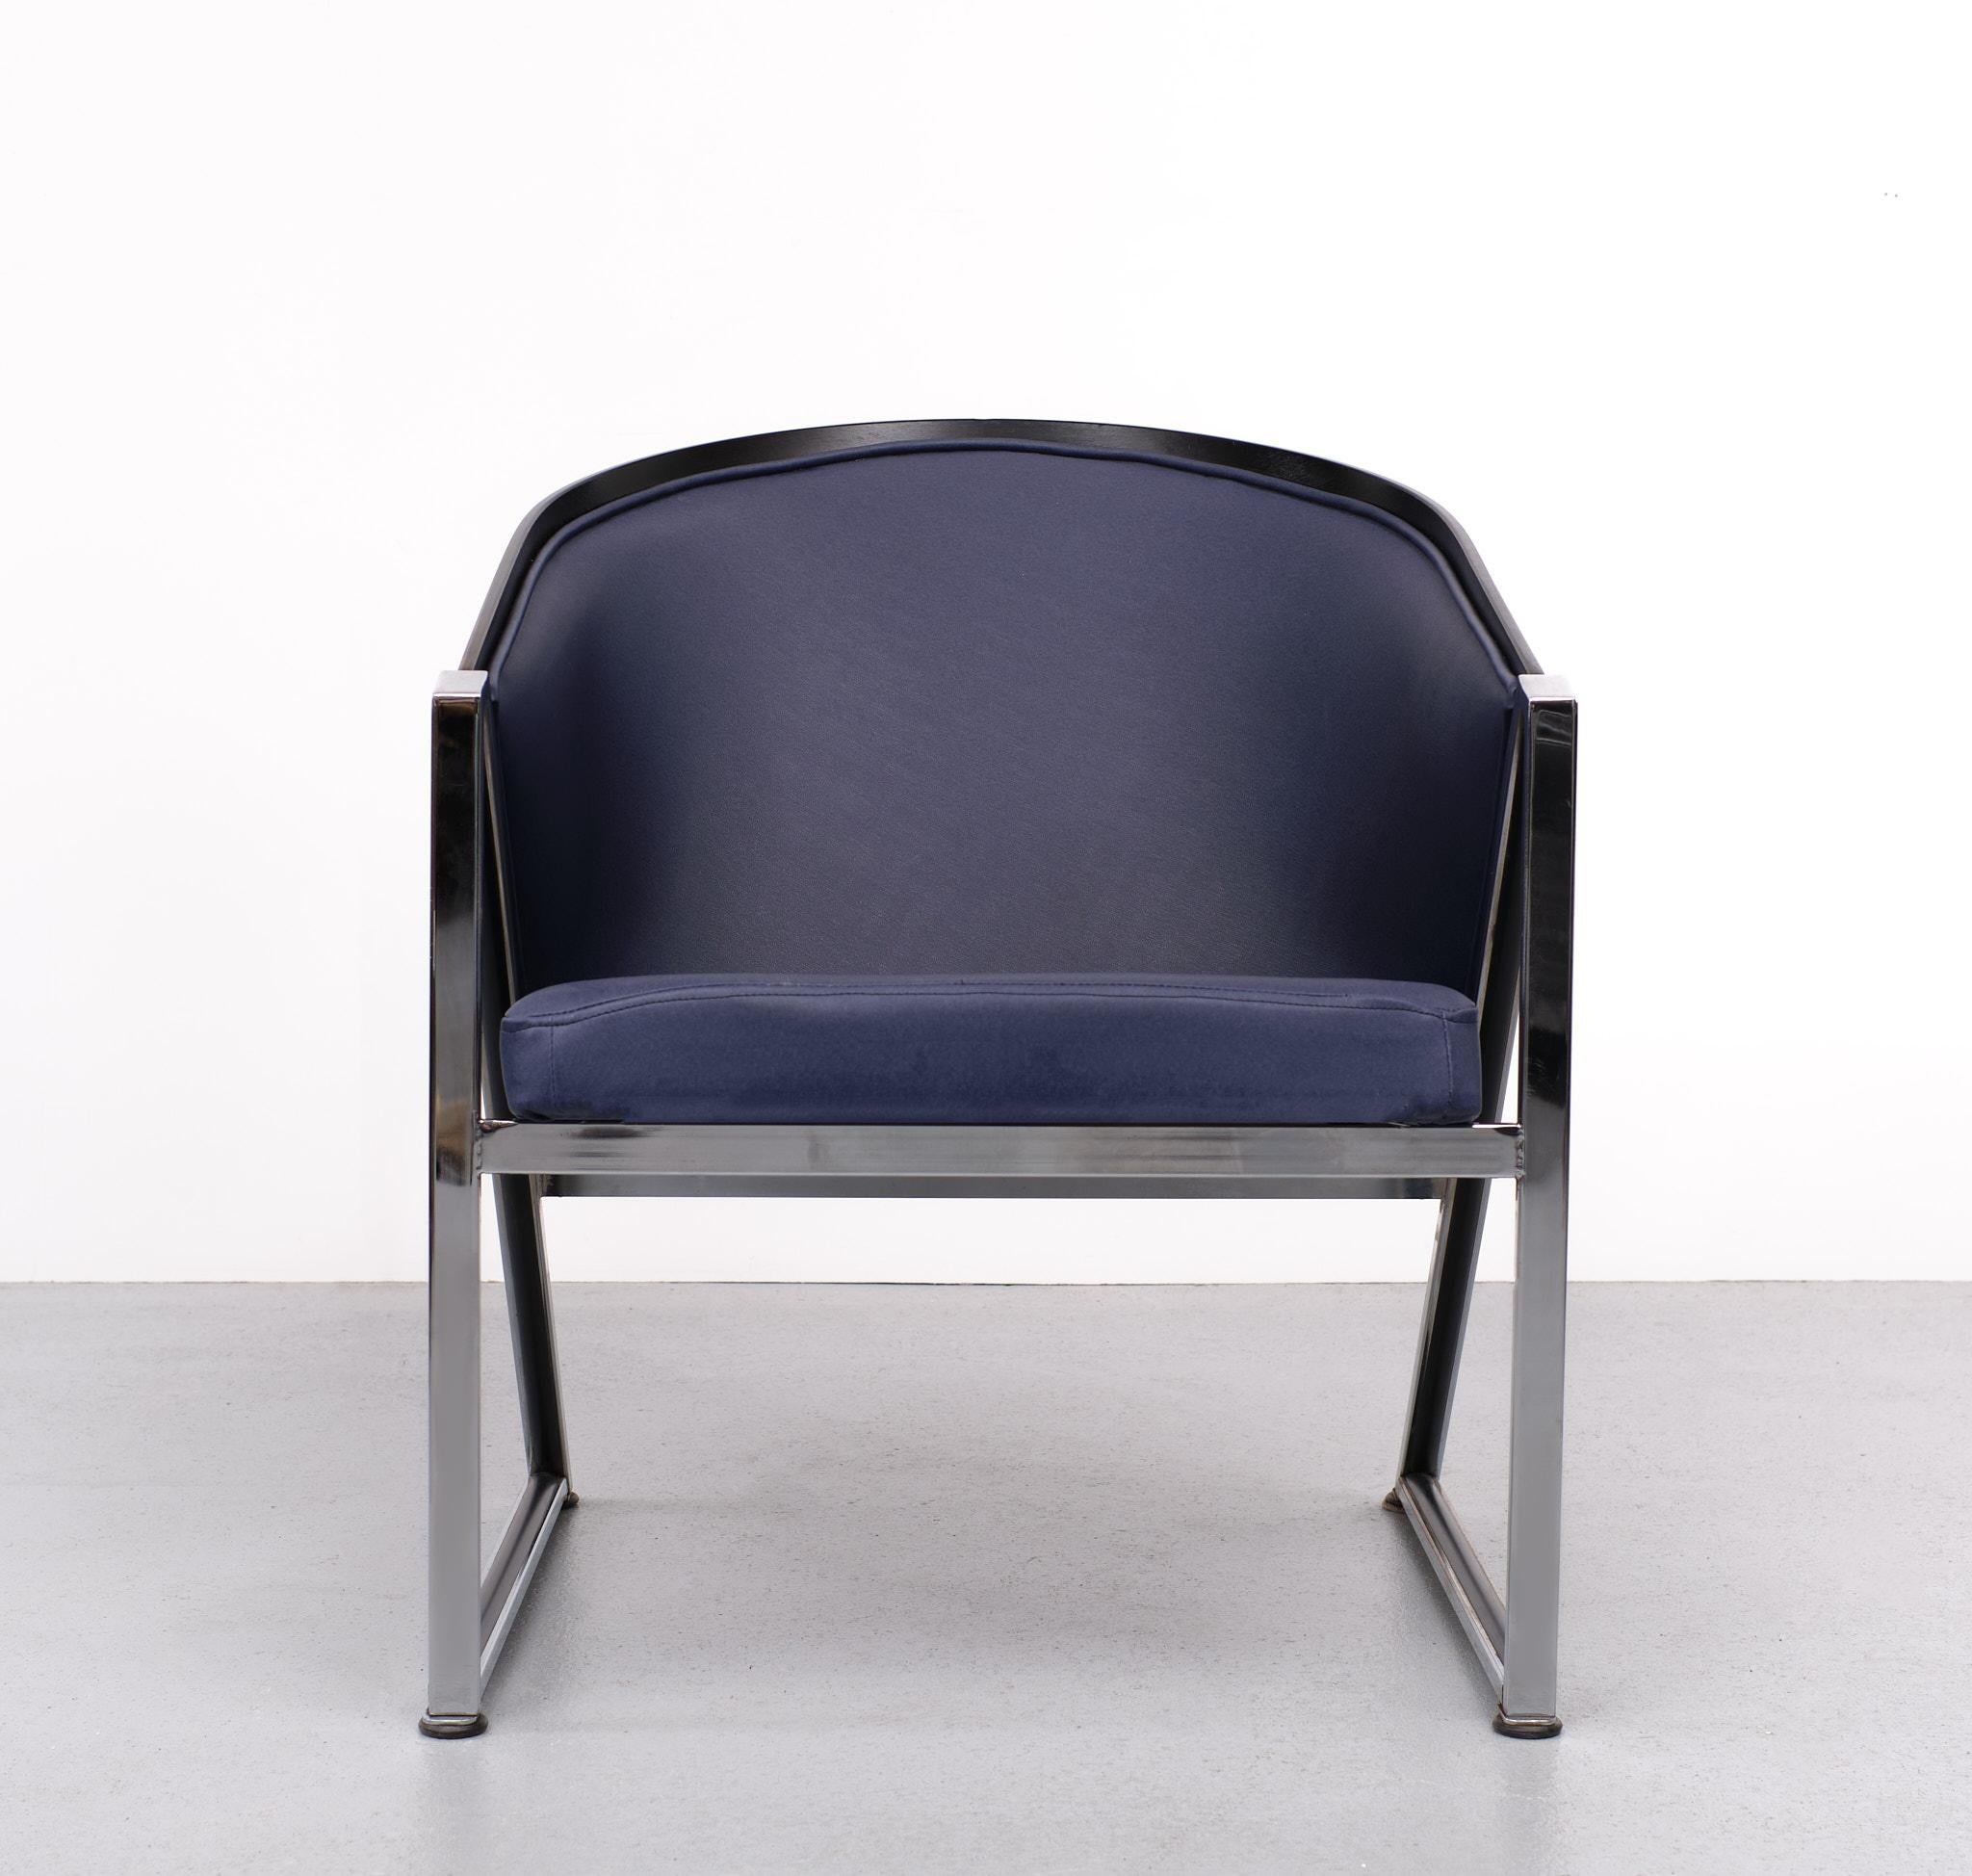 Very nice post modern mondi soft chair designed by the Finnish architect Jouko Jarvisalo for Innocences OY Finland in the 1980s. The chair features a heavy chromed frame with a lacquered plywood shell ,blue vinyl upholstery. Remains in very good